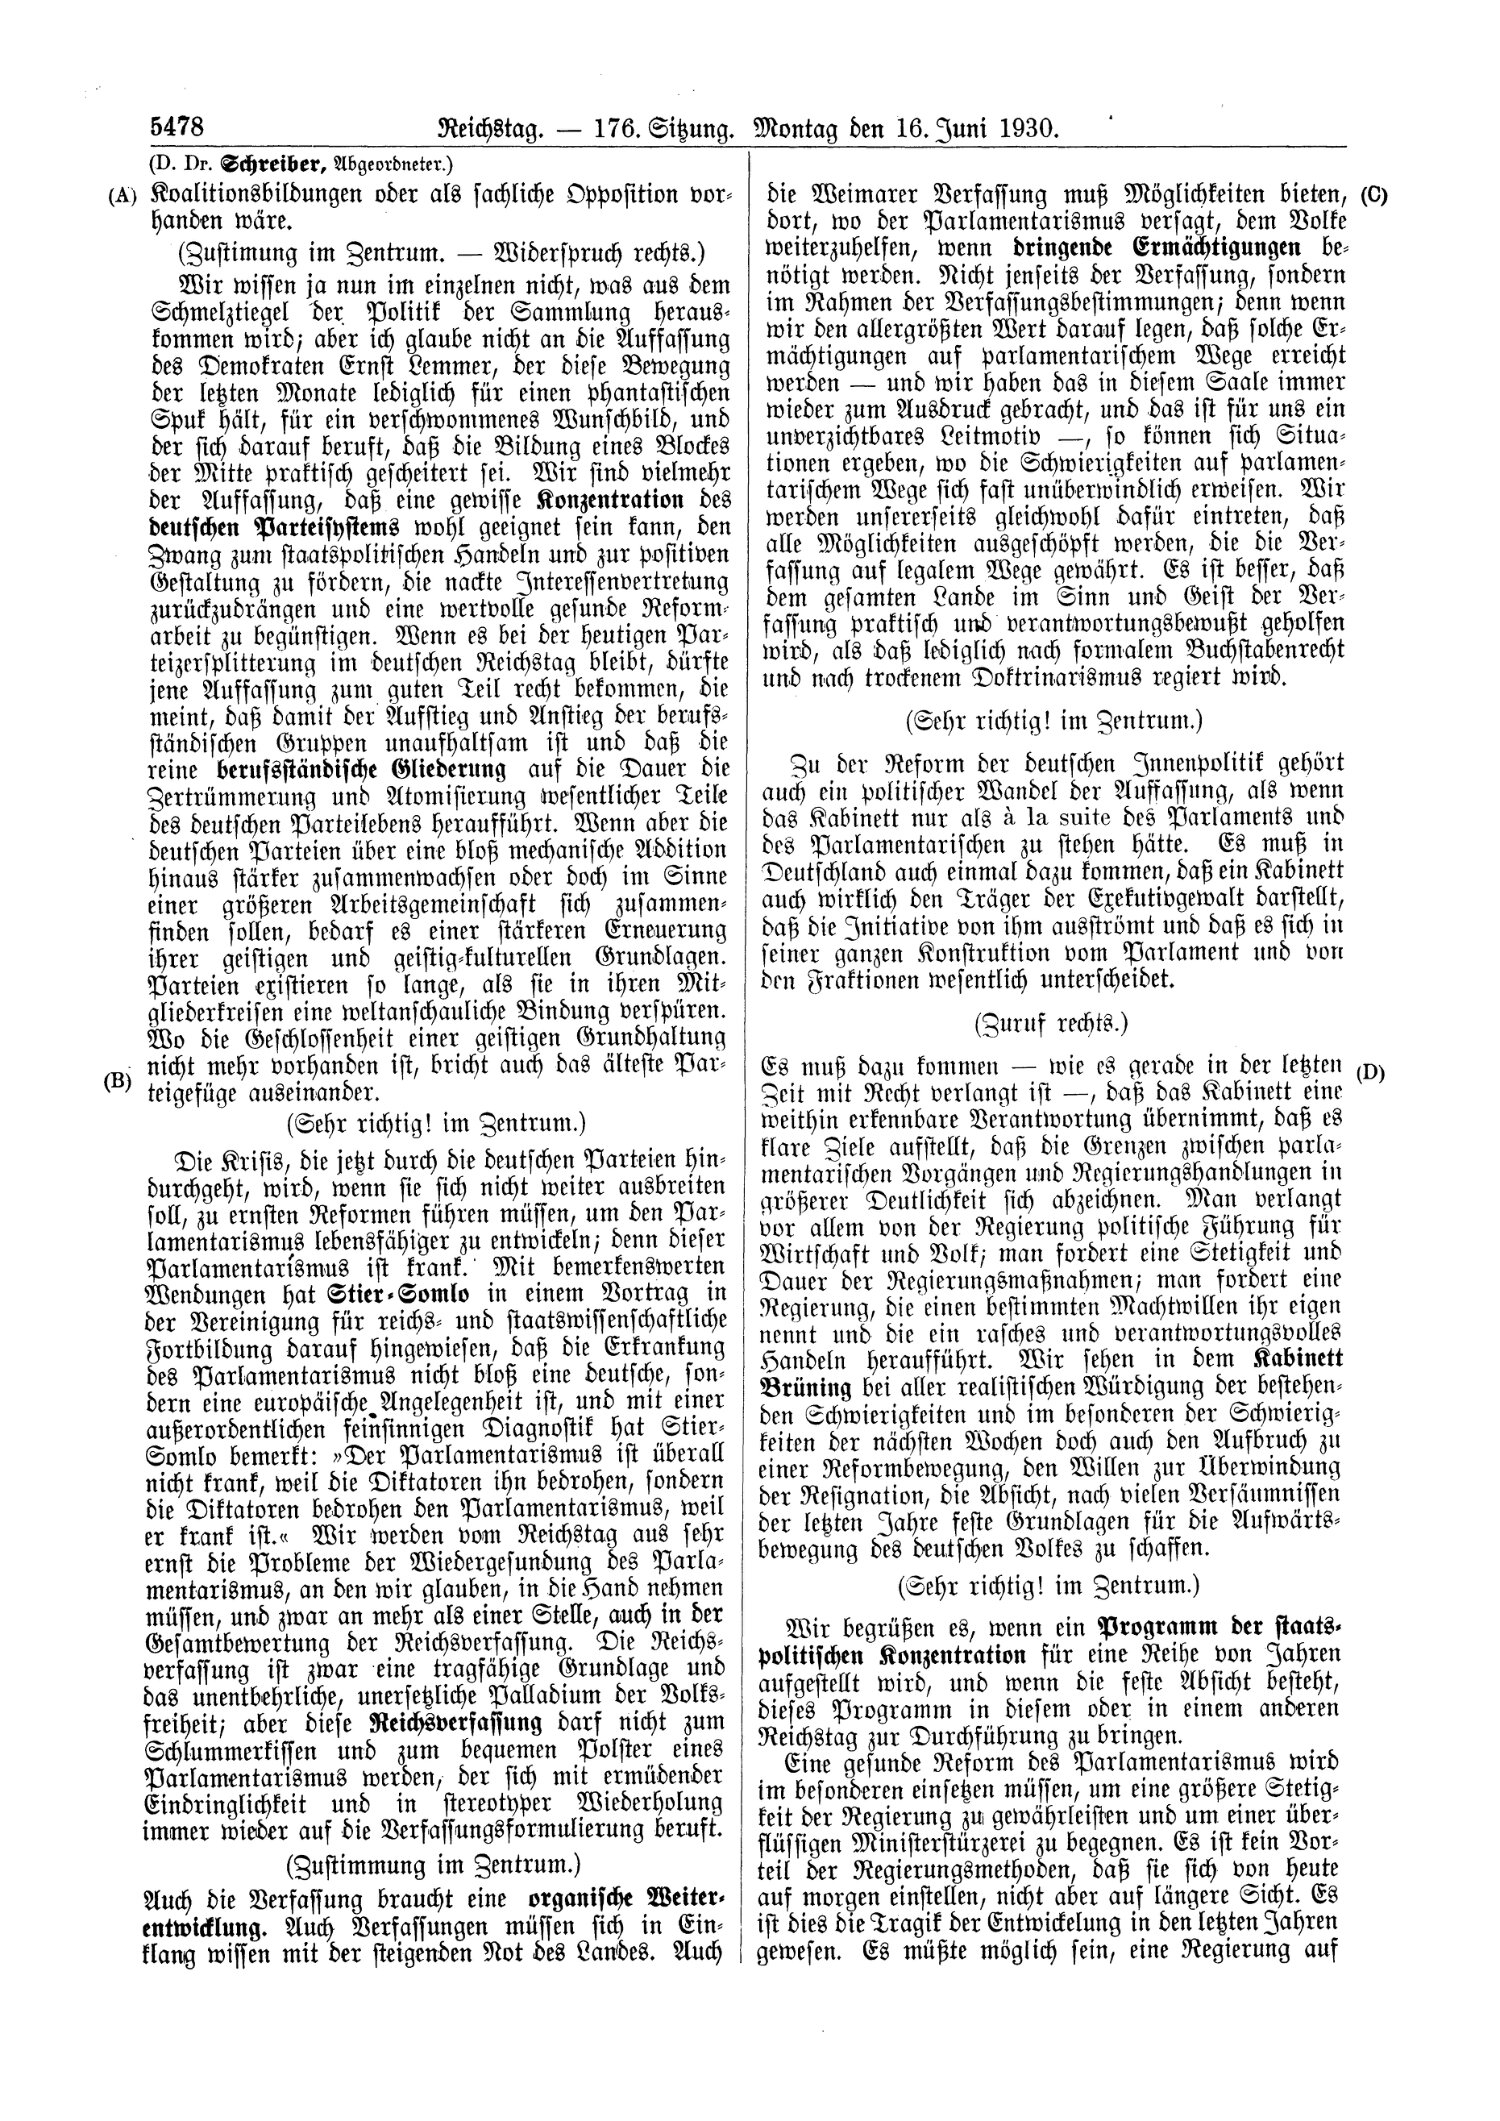 Scan of page 5478